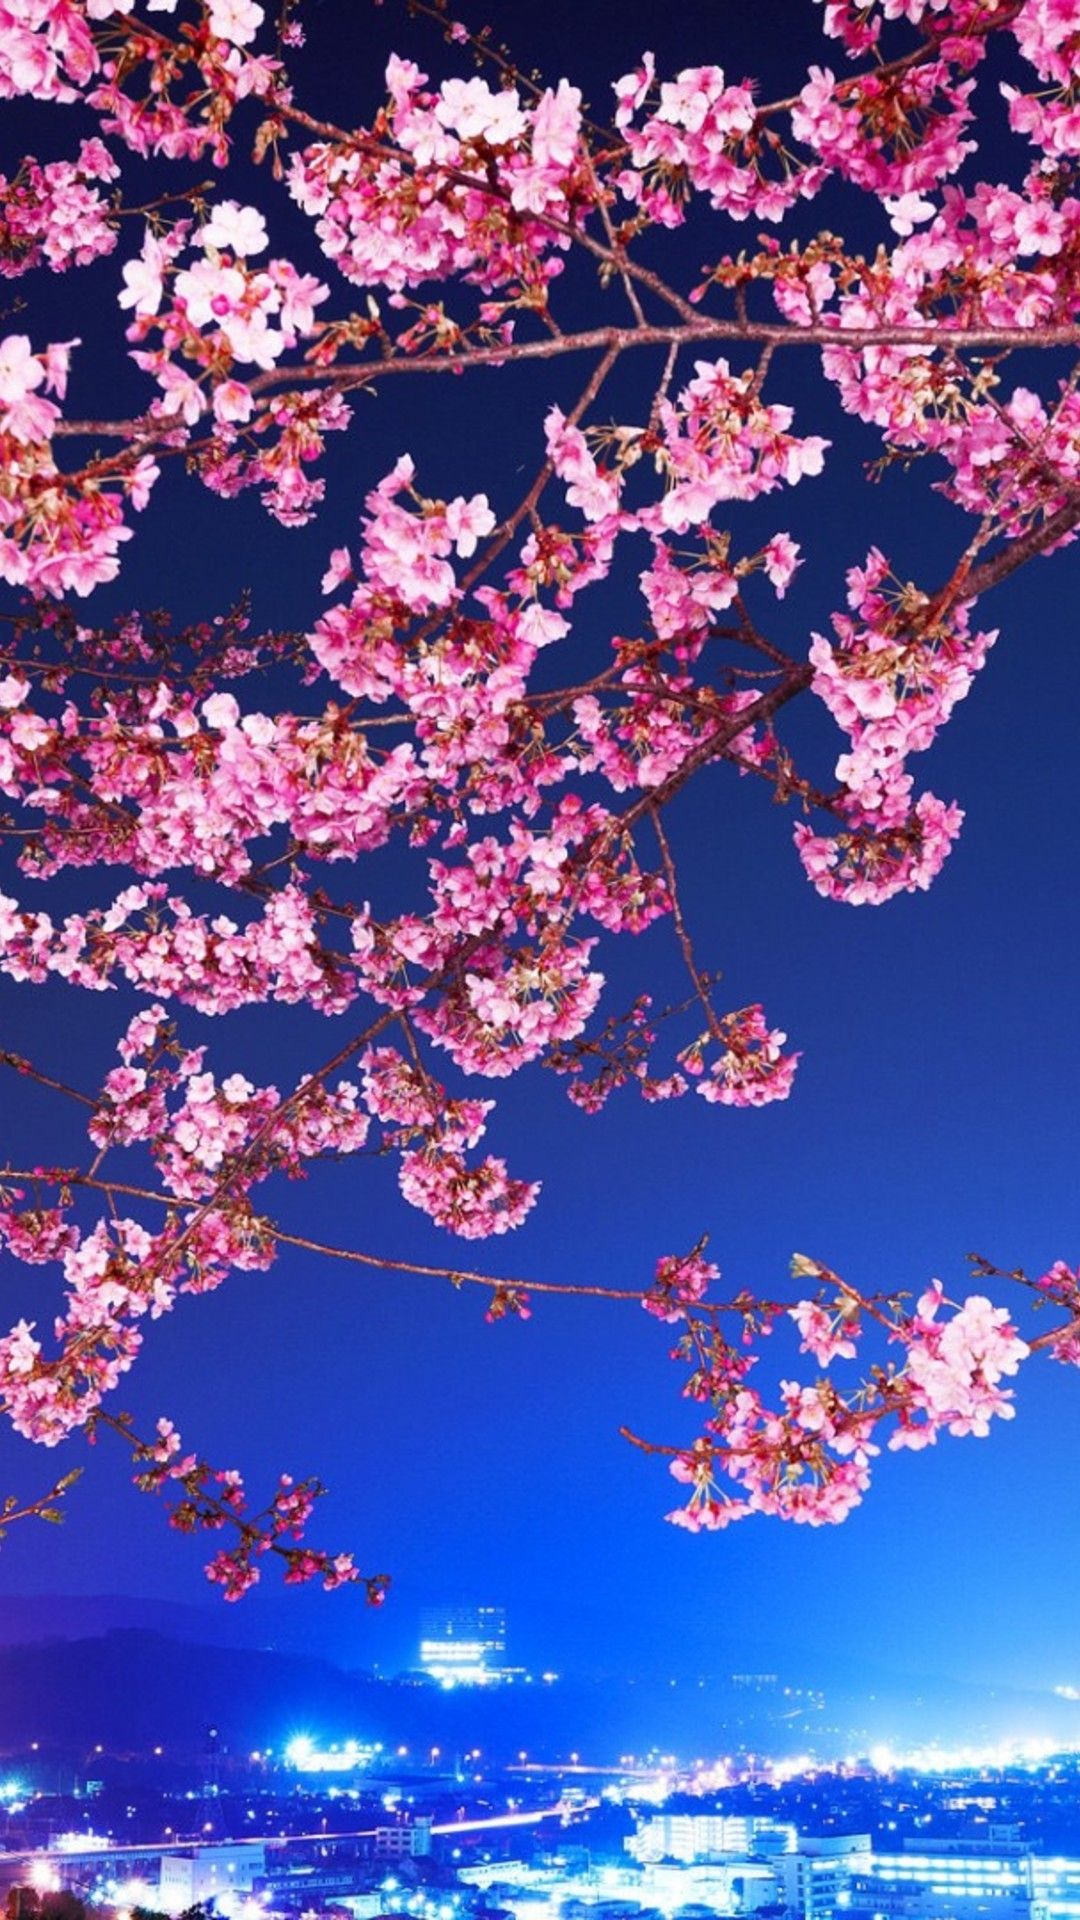 Cherry Blossom Iphone Wallpapers